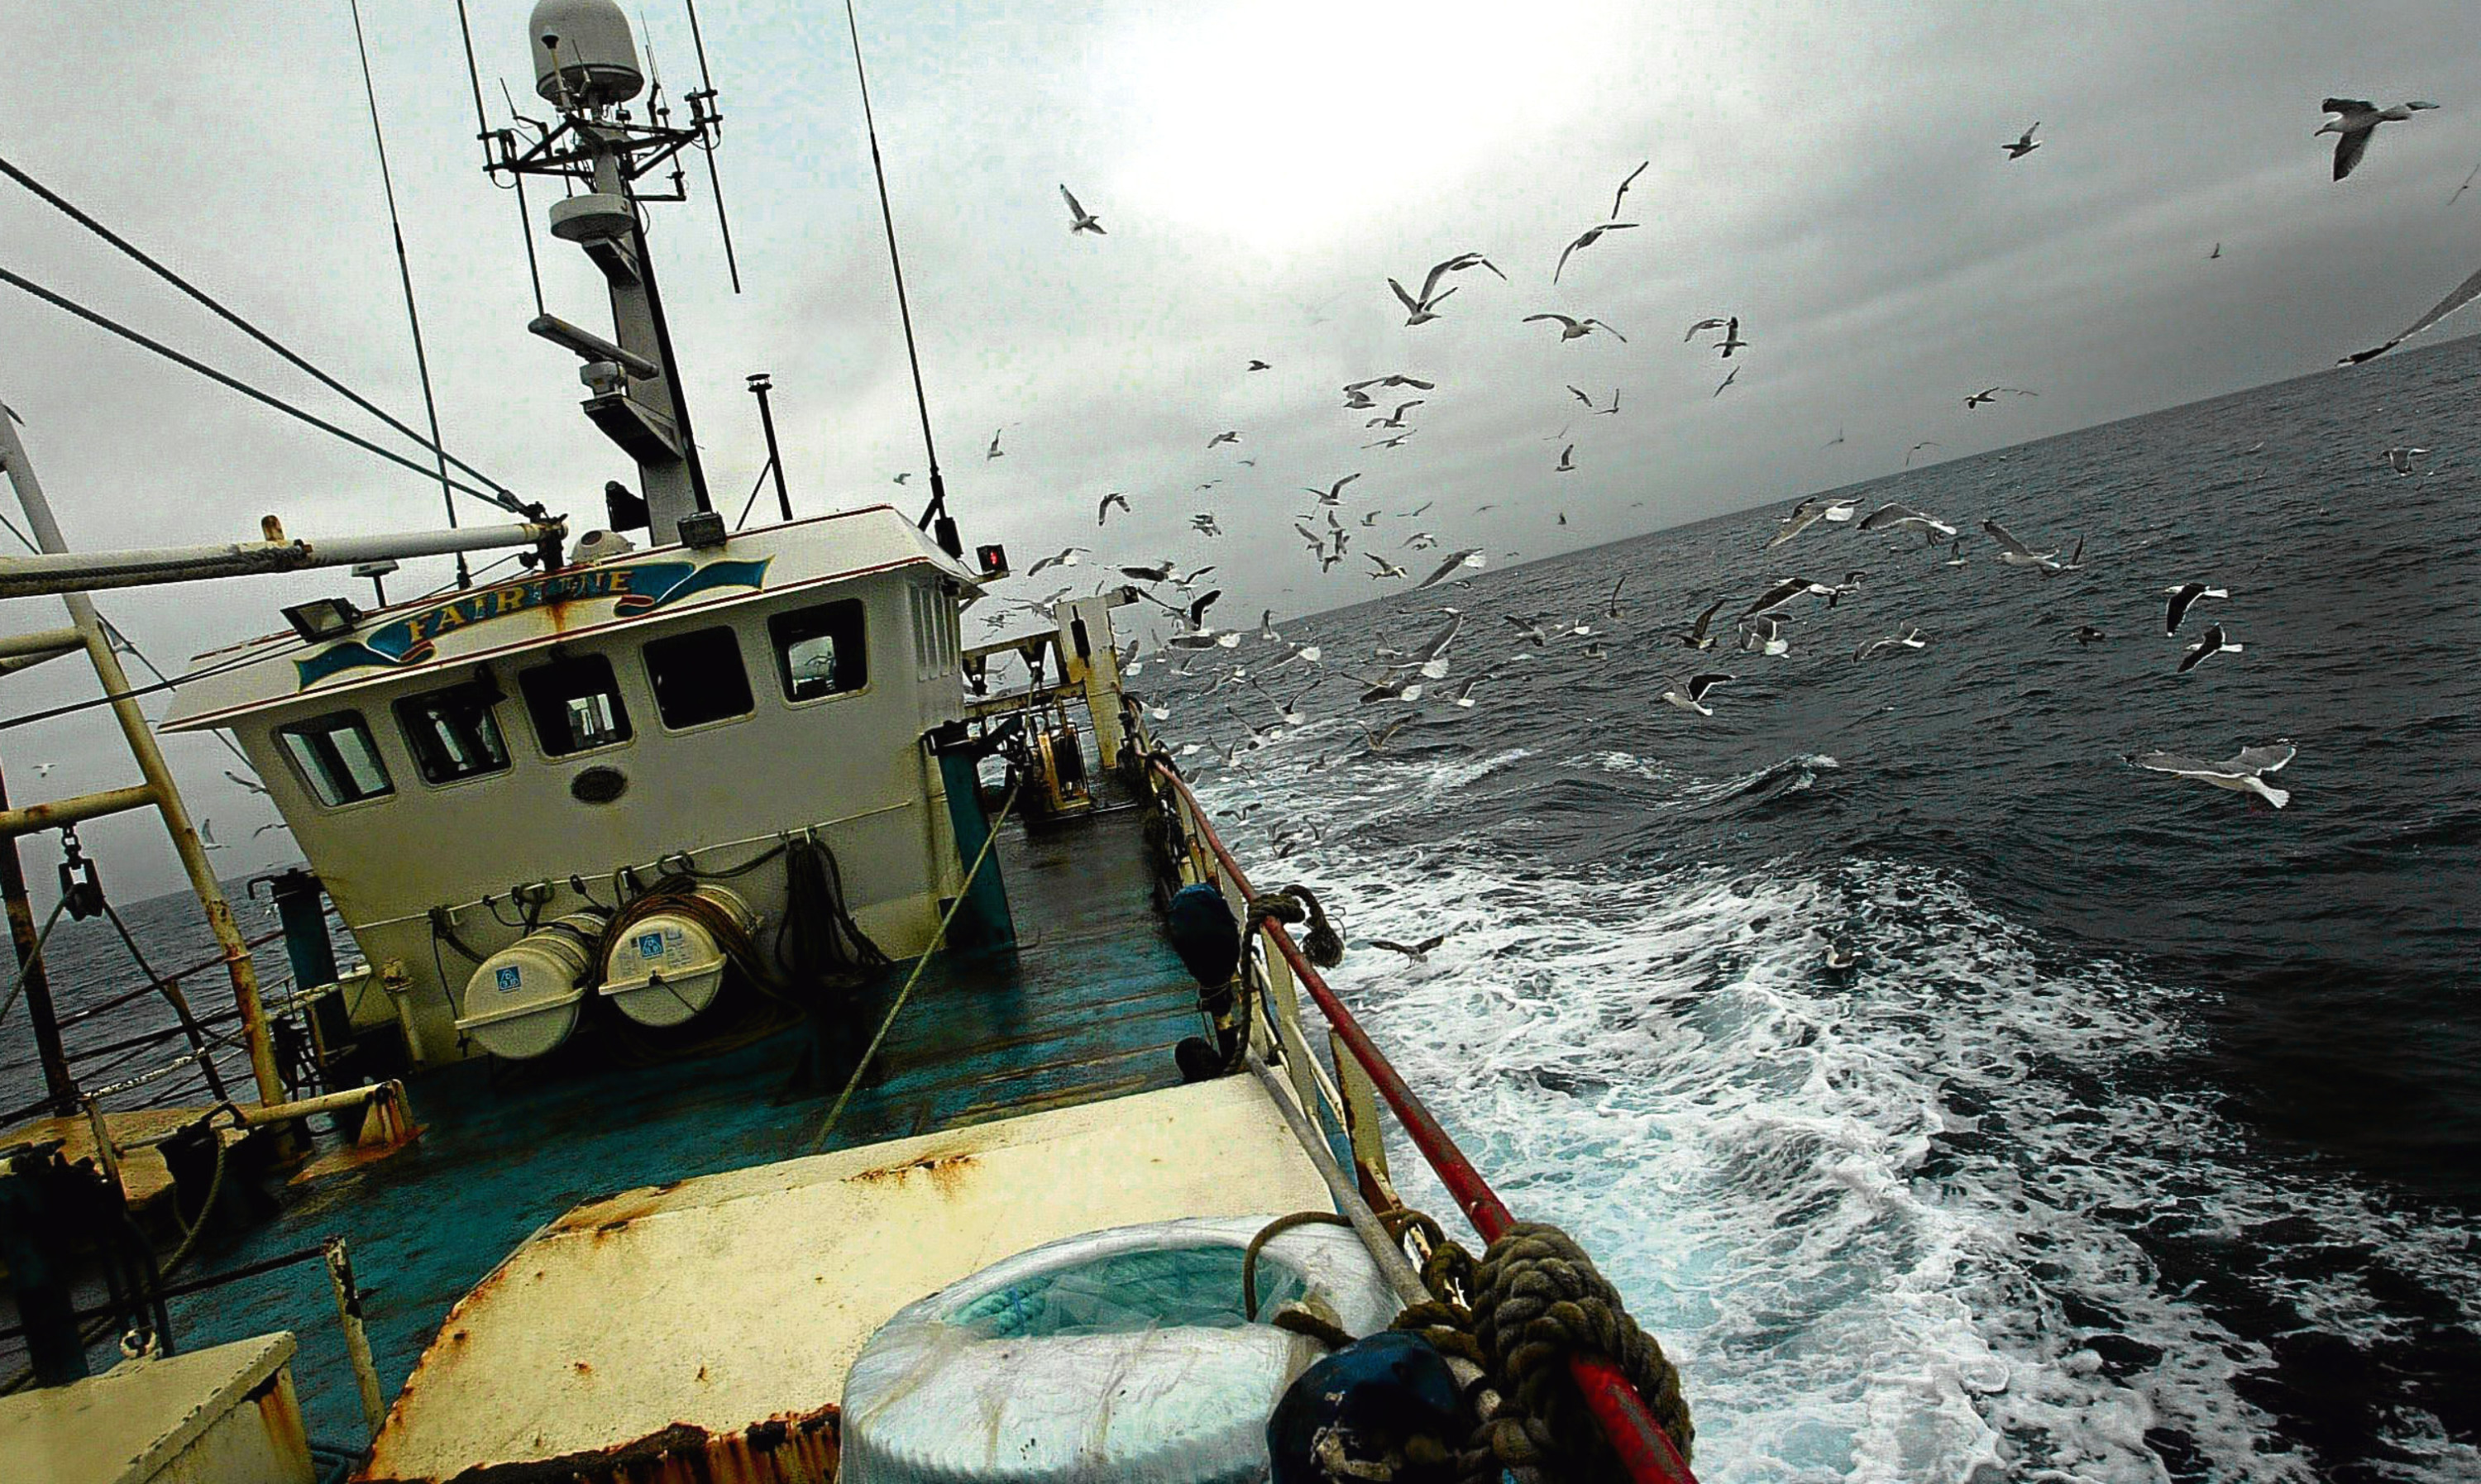 A fishing boat at work in the North Sea.